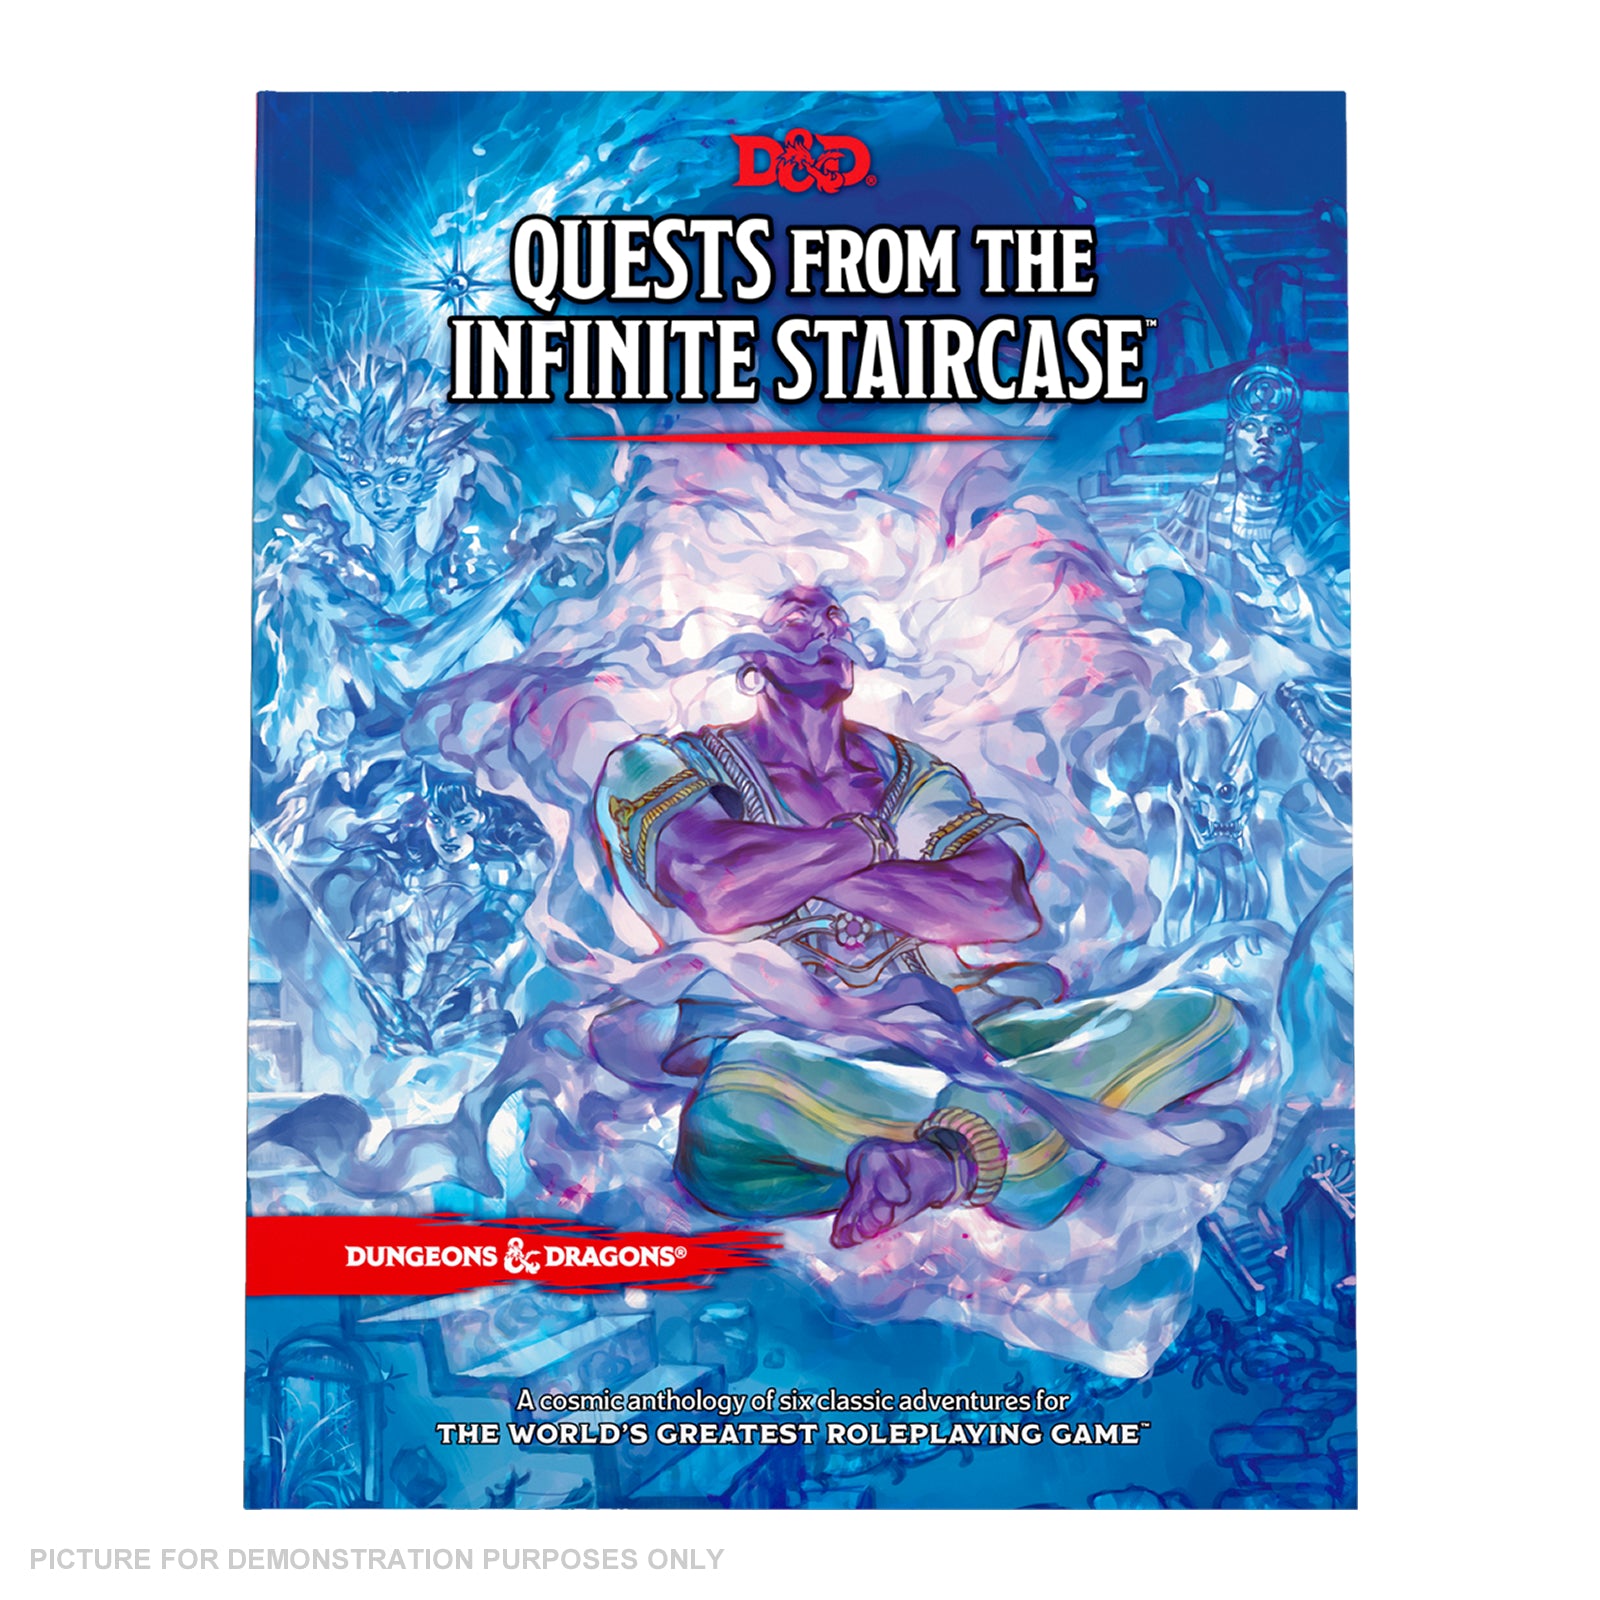 D&D Dungeons & Dragons Quests from the Infinite Staircase Hardcover